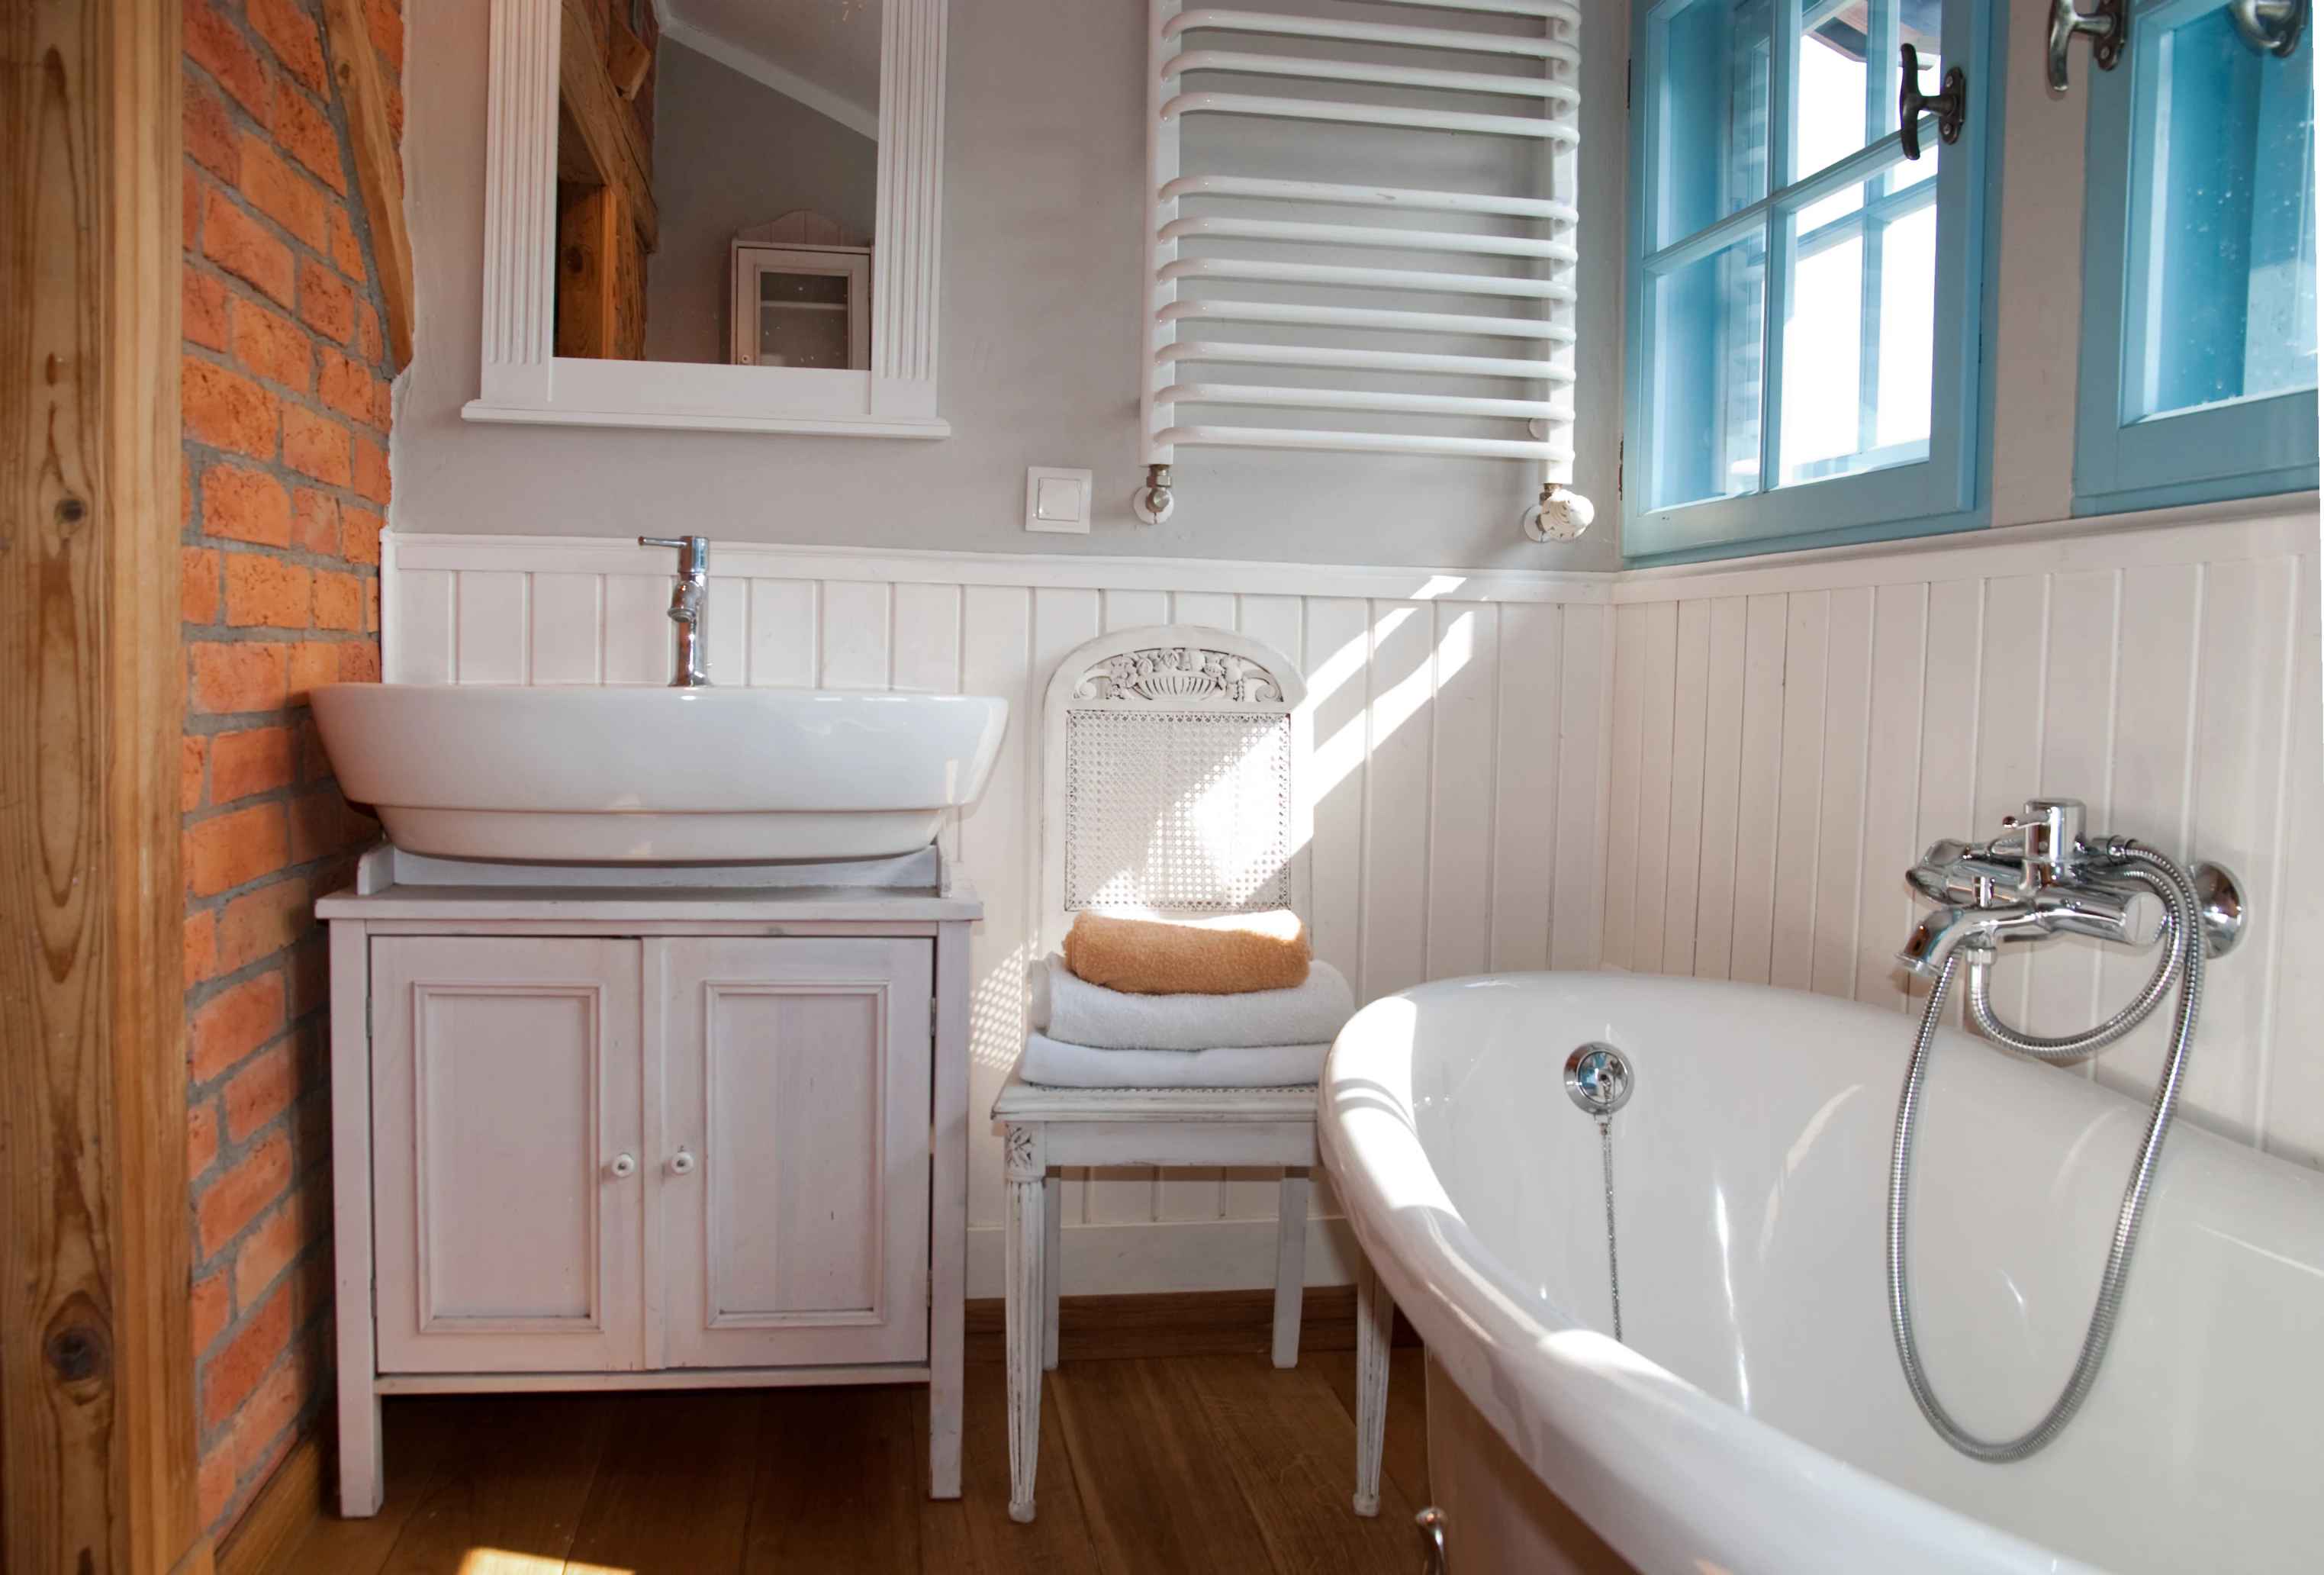 03-Embrace-a-rustic-bathroom-look-with-recycled-weatherboard-paneling